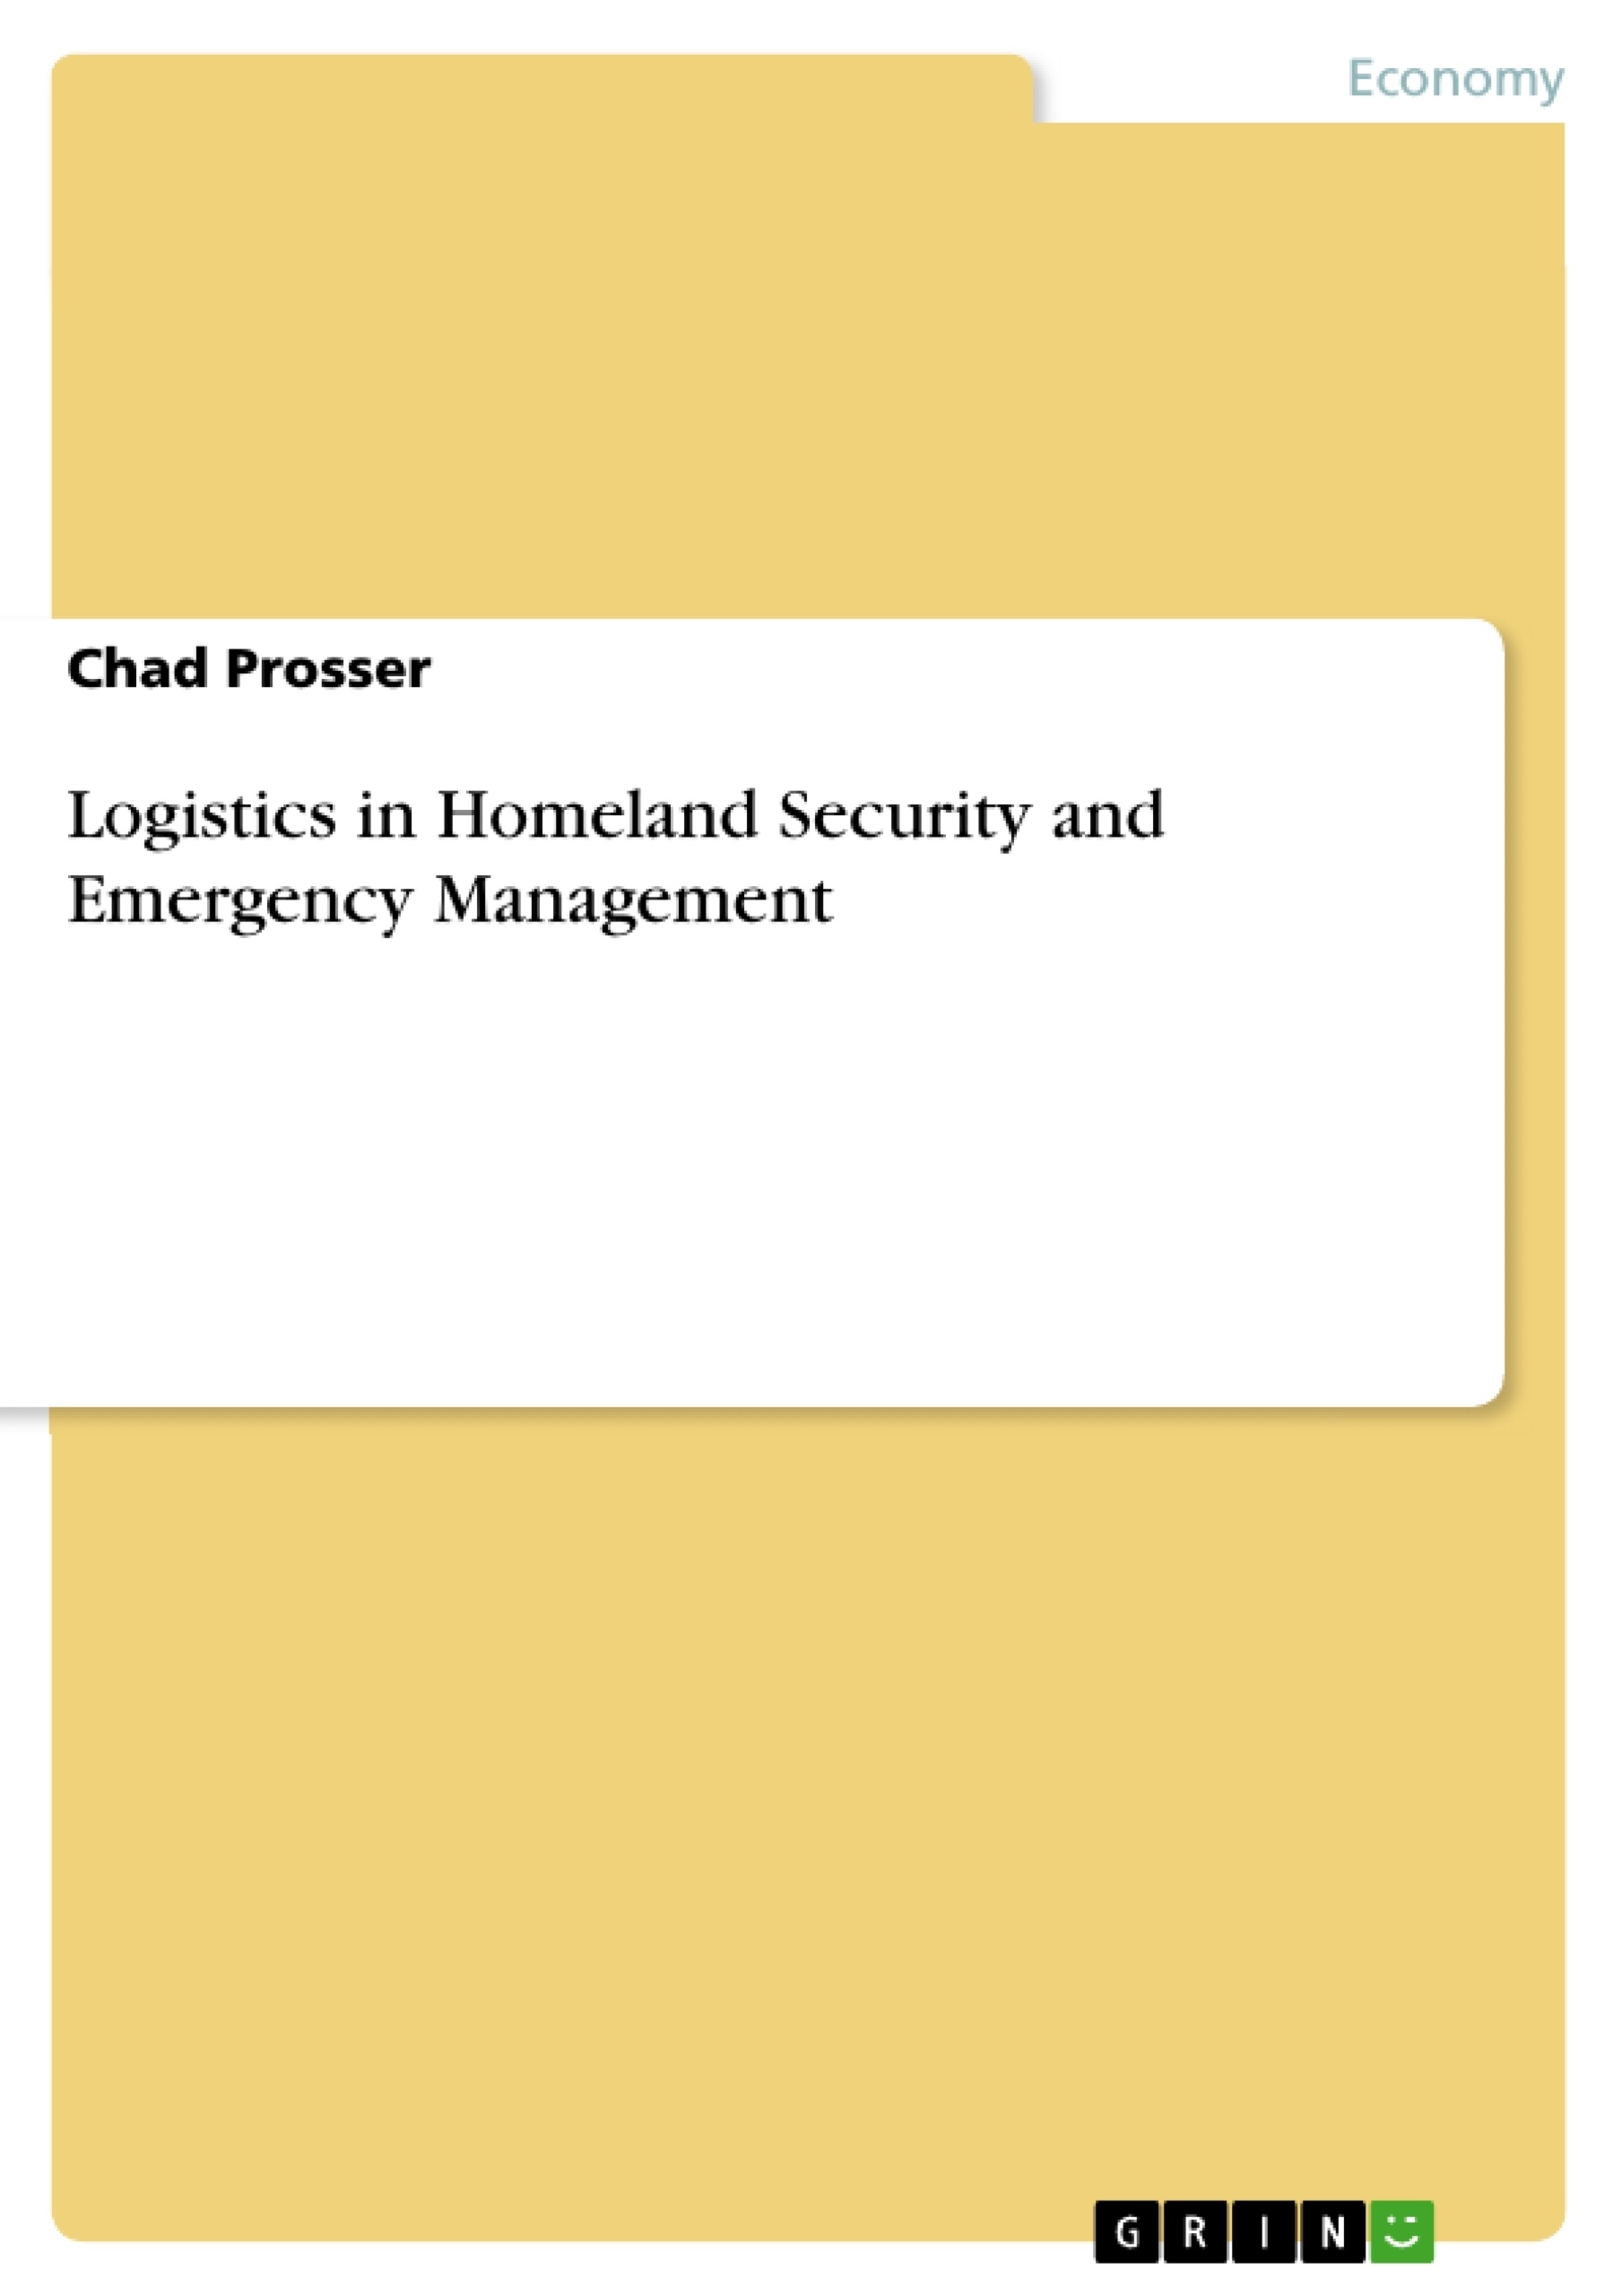 Title: Logistics in Homeland Security and Emergency Management